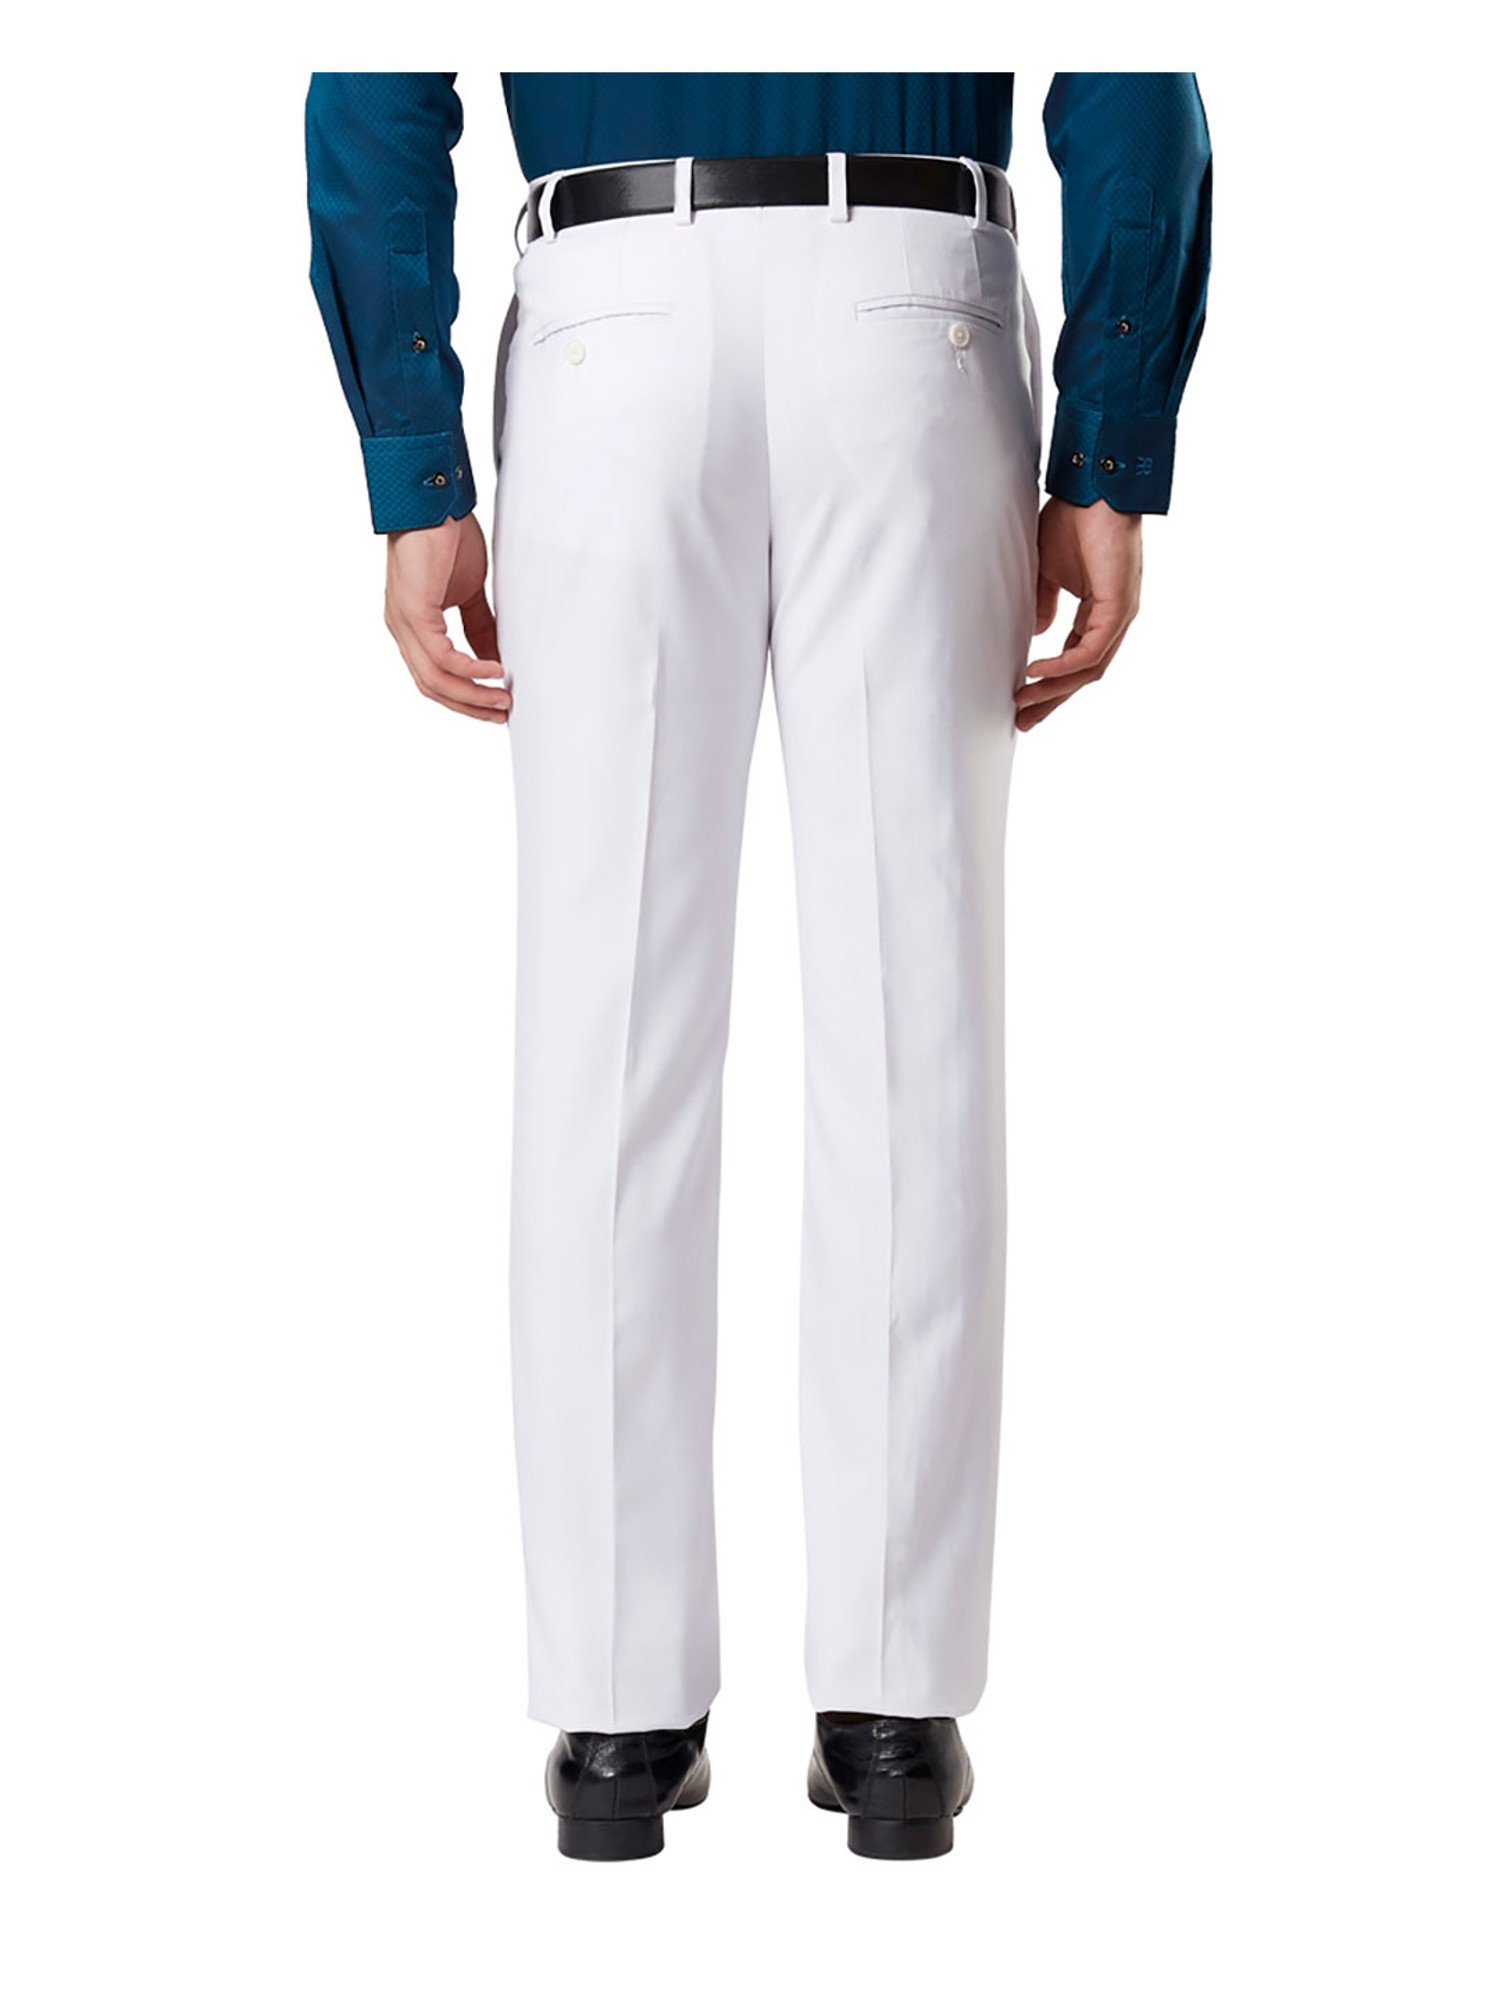 Men Slim Fit Light Blue Viscose Rayon Trousers Price in India Full  Specifications  Offers  DTashioncom